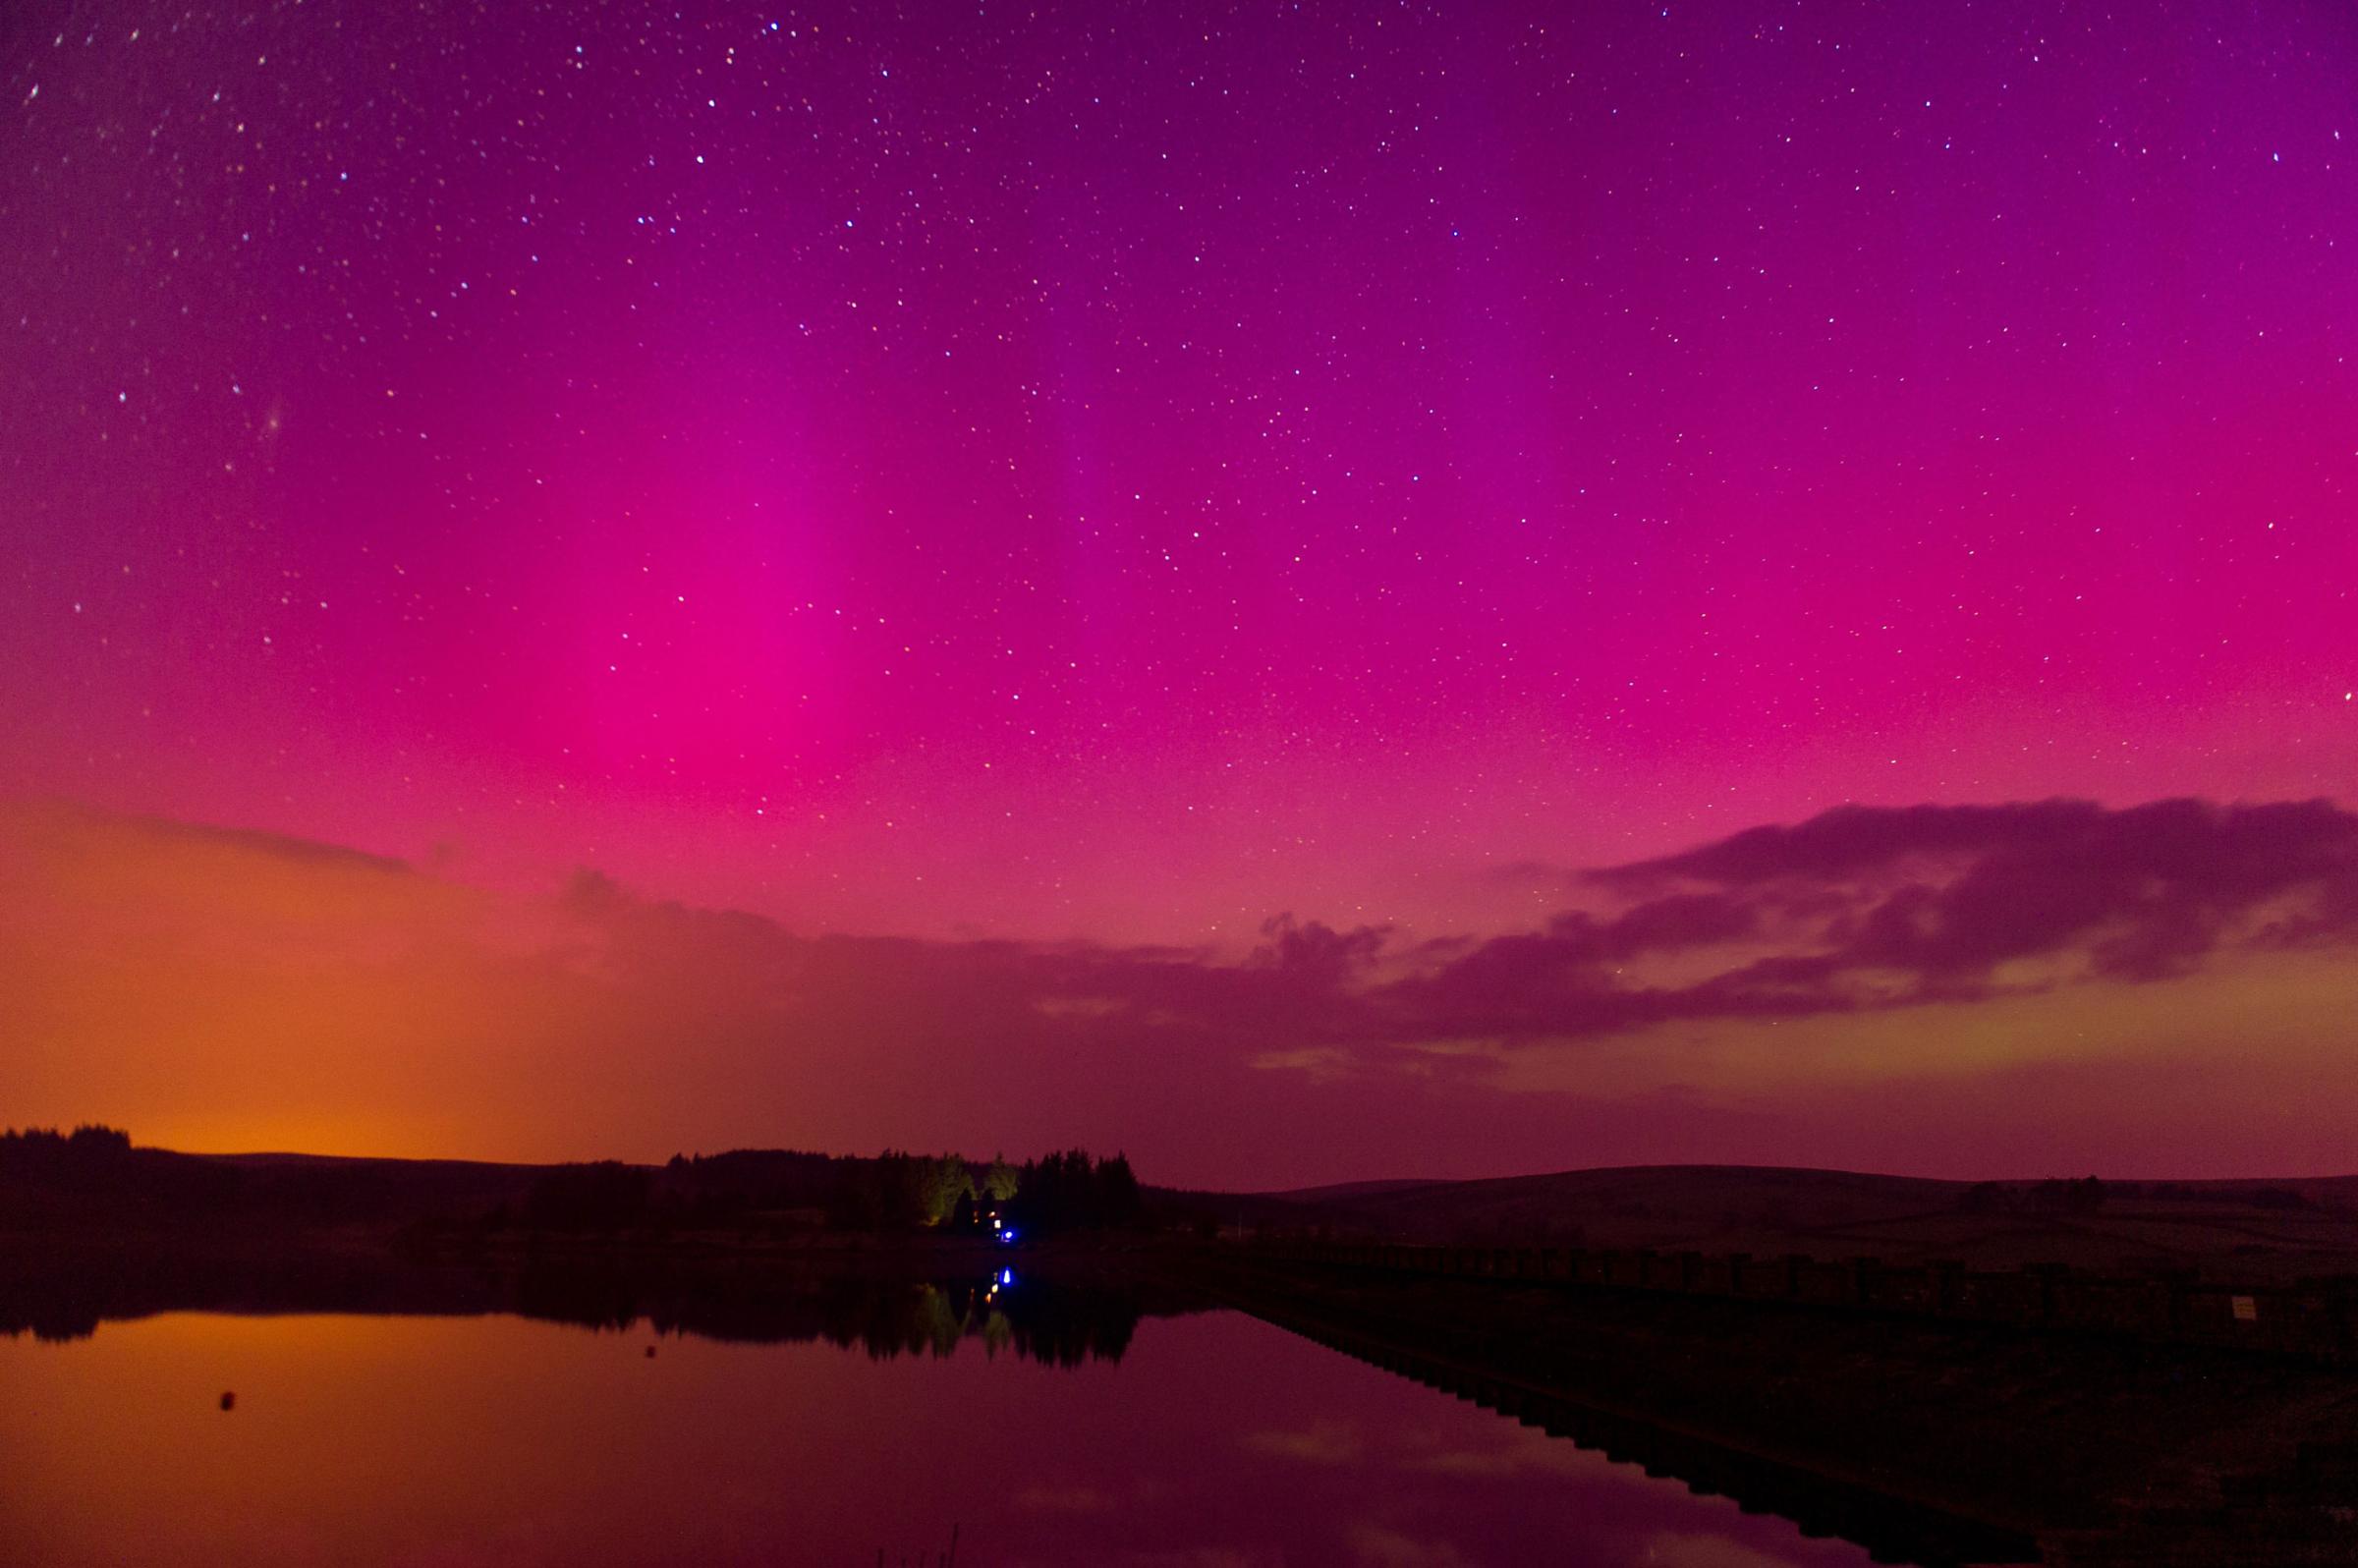 The Northern Lights are seen over Usk Reservoir at the Brecon Beacons, Wales, on March 17, 2015.